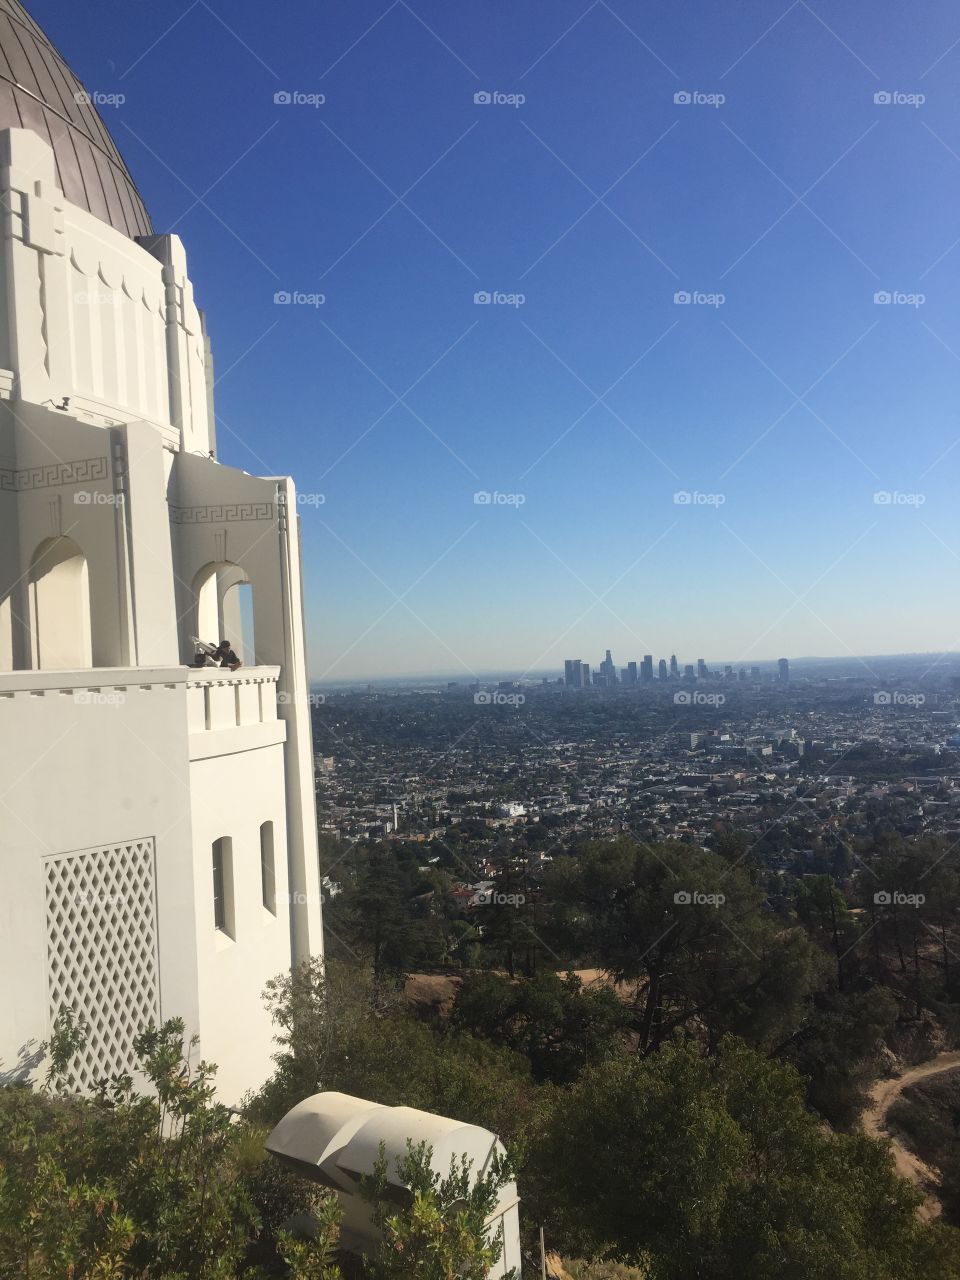 The view from the Griffith Observatory, LA